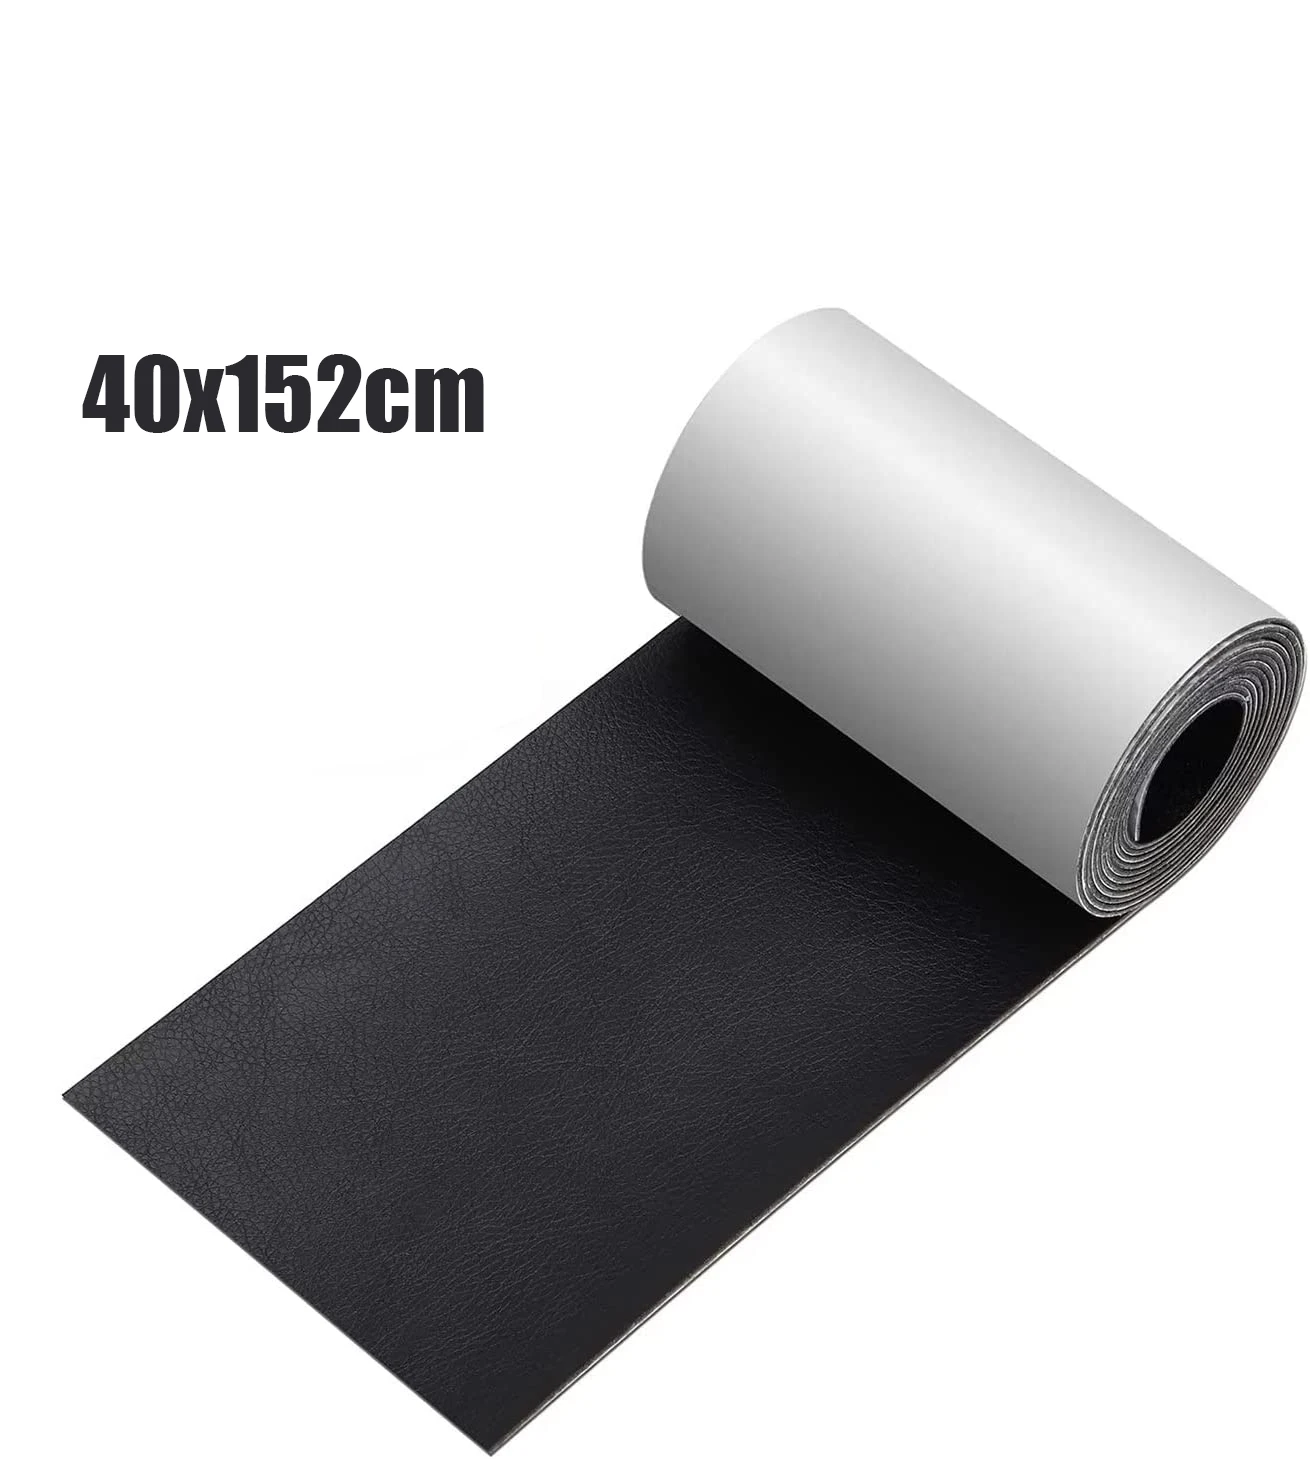 

40x152cm Leather Repair Patch Tape for Couches Self-Adhesive refinisher cuttable for Furniture Sofa Vinyl Car Seats Couch Chairs